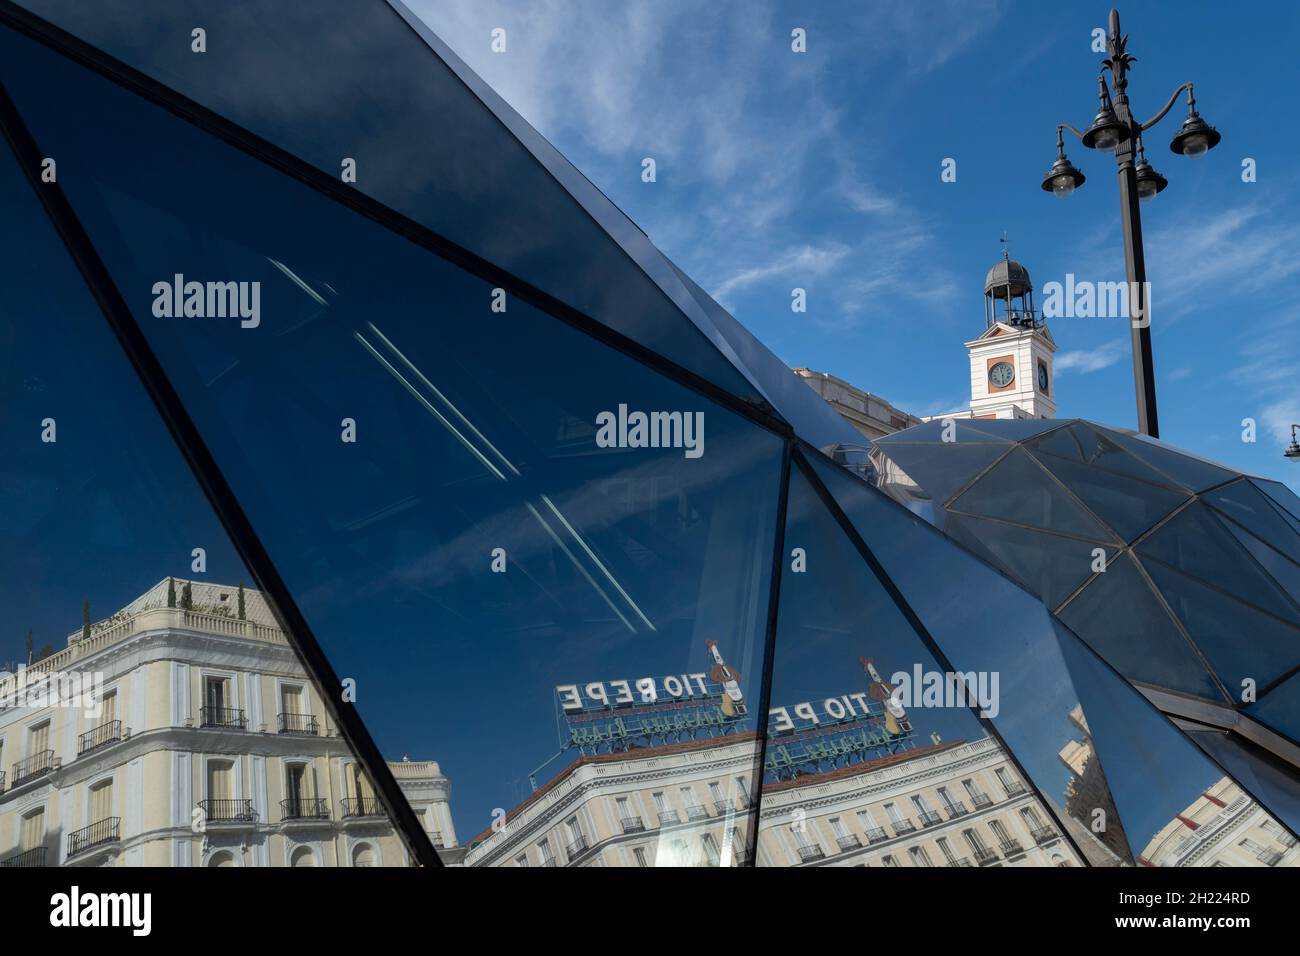 The landmark Tío Pepe sign is reflected in the modern facade of the Sol metro station in the Puerta del Sol in Madrid, Spain. The station was part of Stock Photo